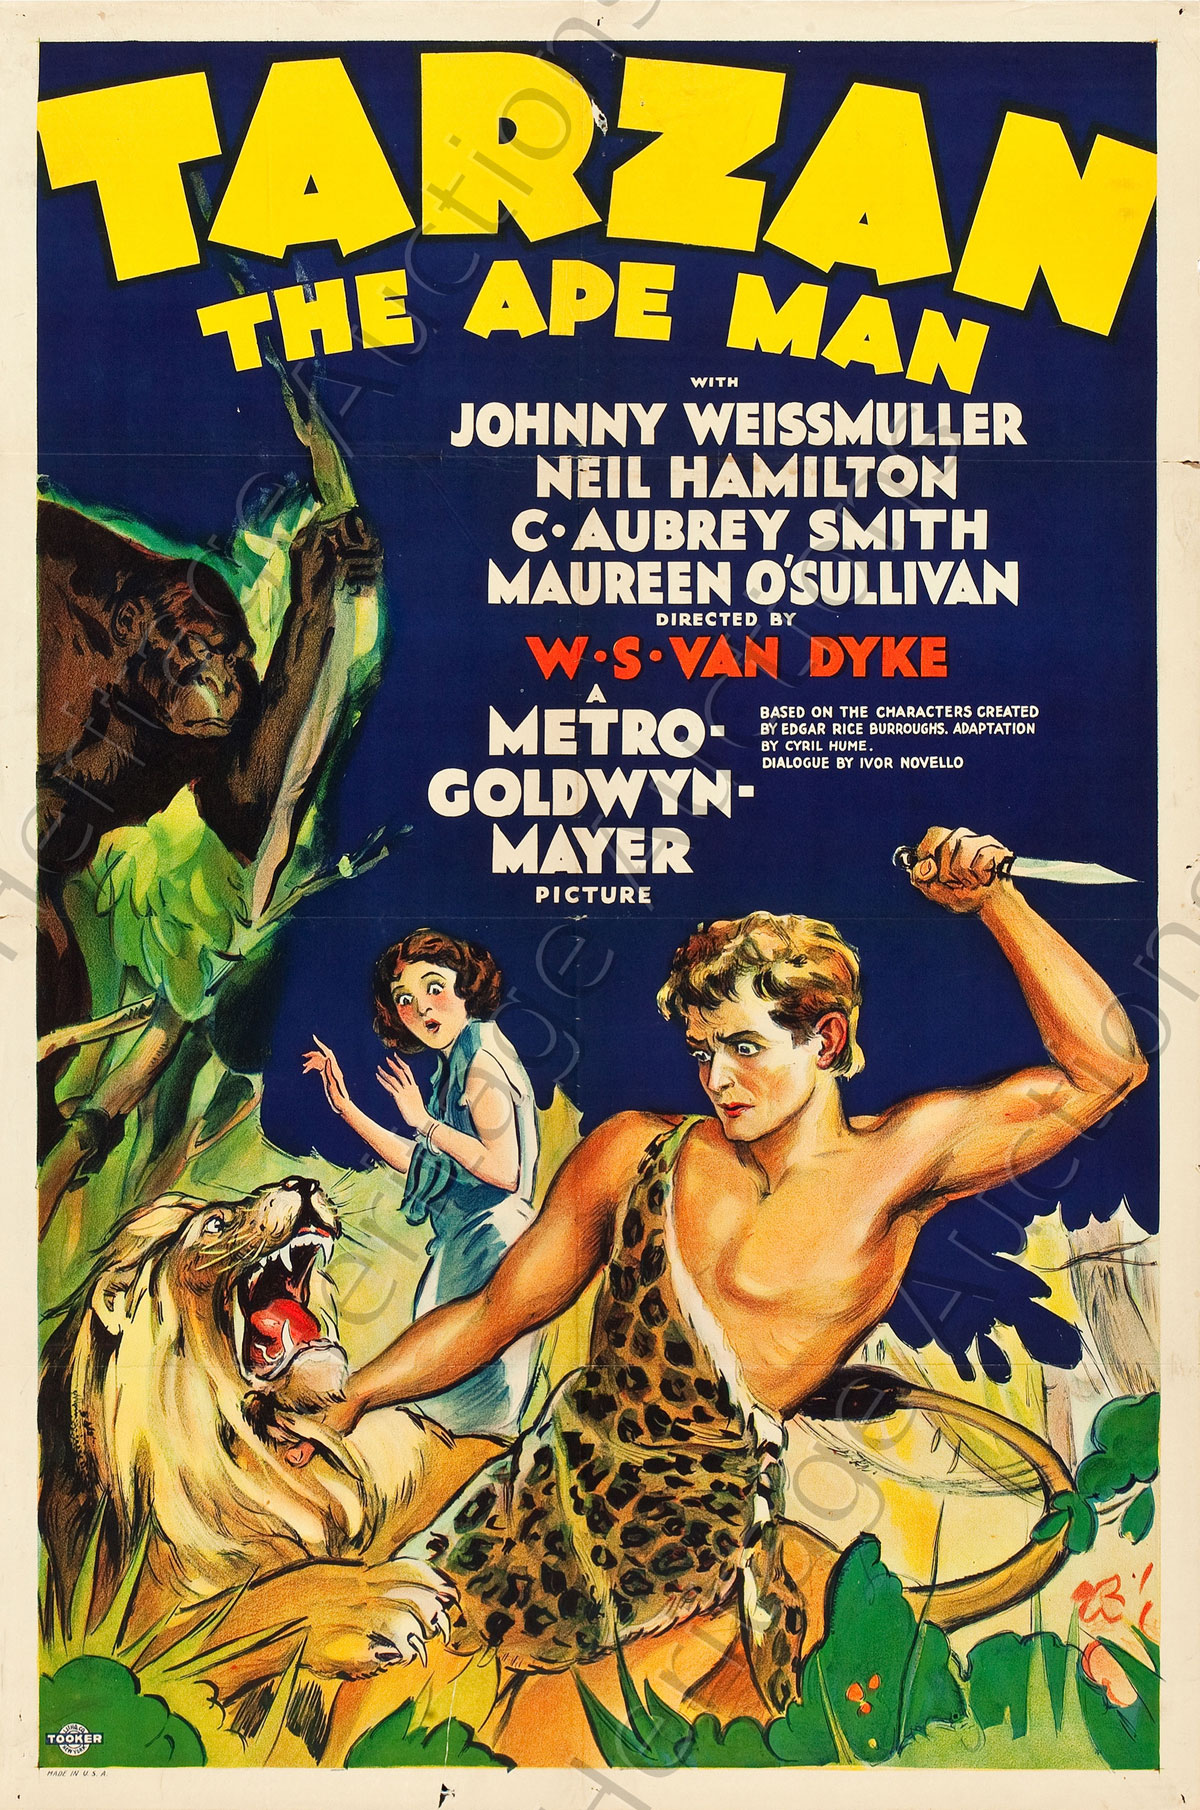 The Bloody Pit #15 - The Johnny Weissmuller Tarzan films! 